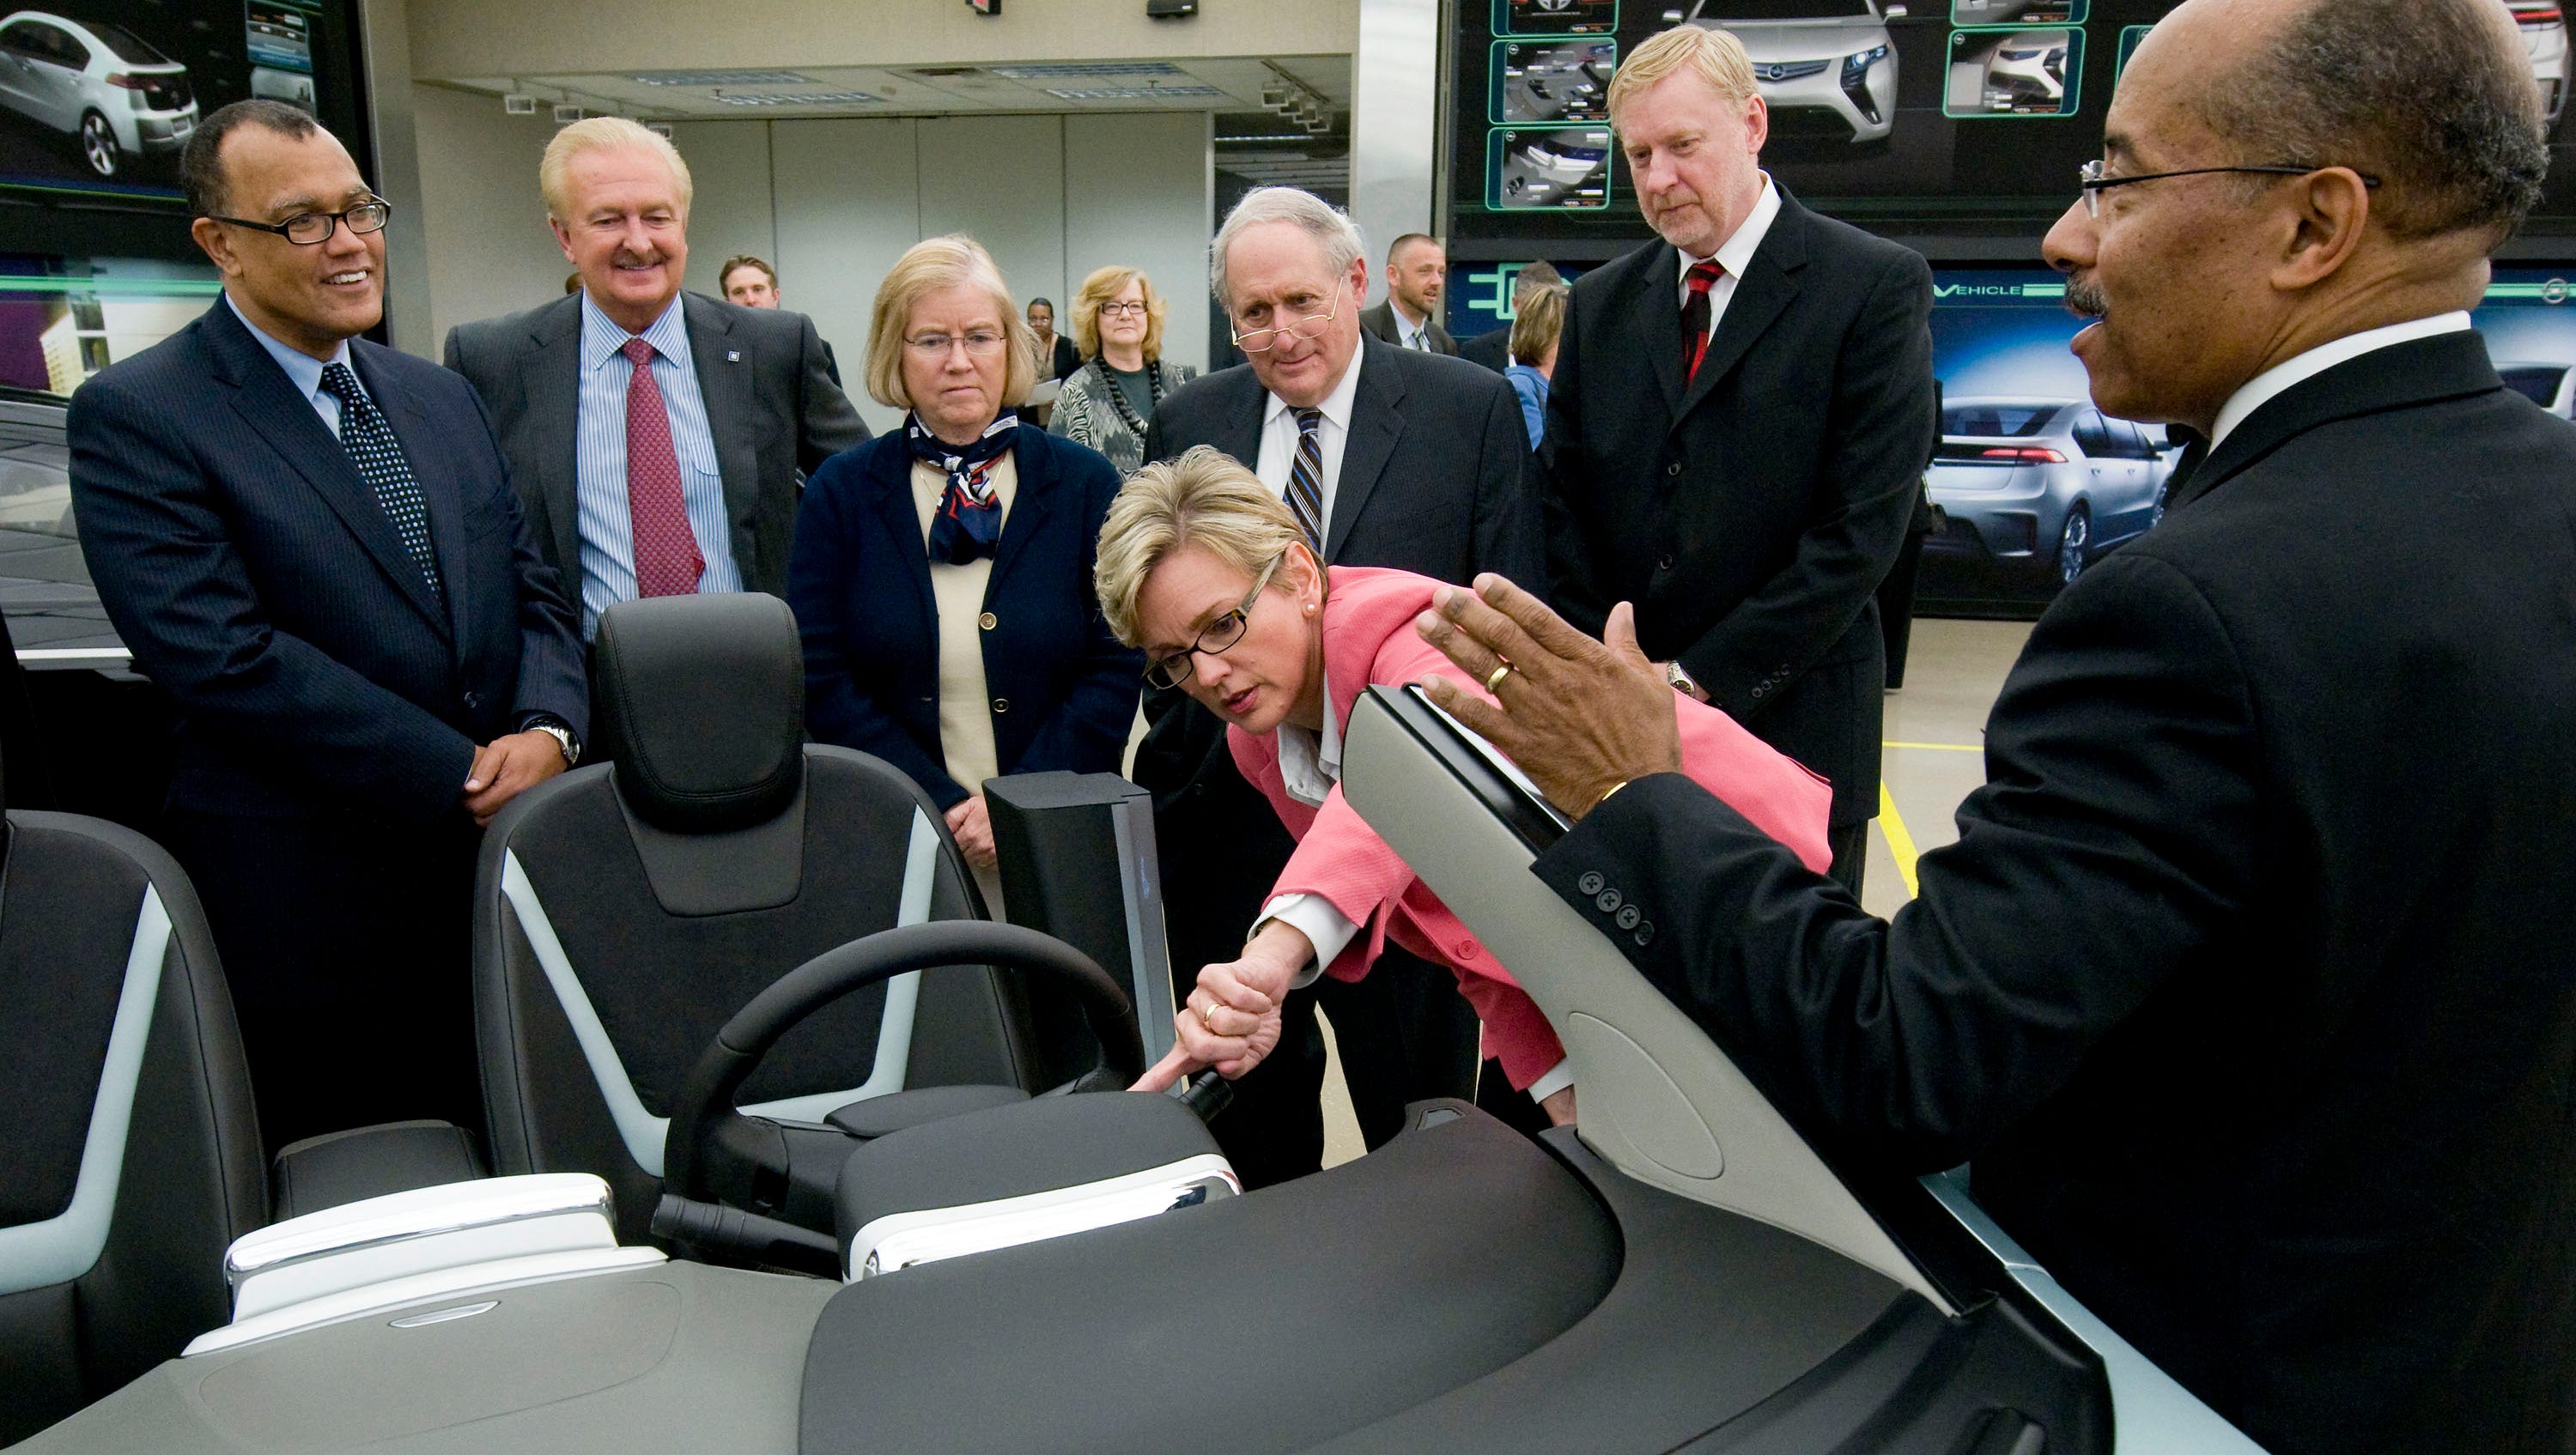 President Obama's auto czar Ed Montgomery, left,   looks on with GM's Gary Cowger, Michigan Rep. Candice Miller, U.S. Sen. Carl Levin, GM's Tom Stephens and Michigan Gov. Jennifer Granholm as GM Vice President Global Design Ed Welburn gives a tour of the Chevrolet Volt Studio at General Motors Design Friday, May 8, 2009 in Warren.